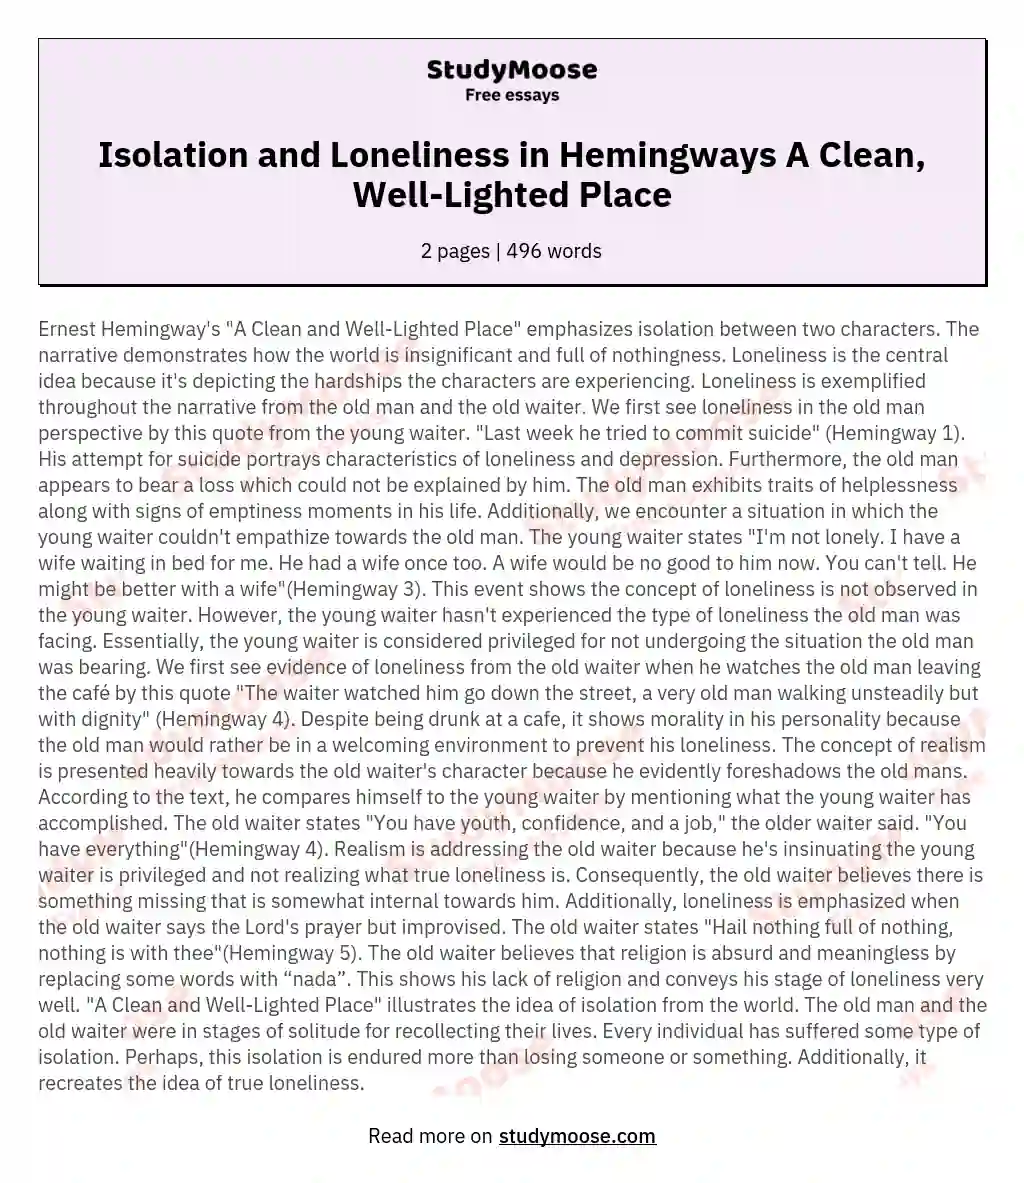 Isolation and Loneliness in Hemingways A Clean, Well-Lighted Place essay